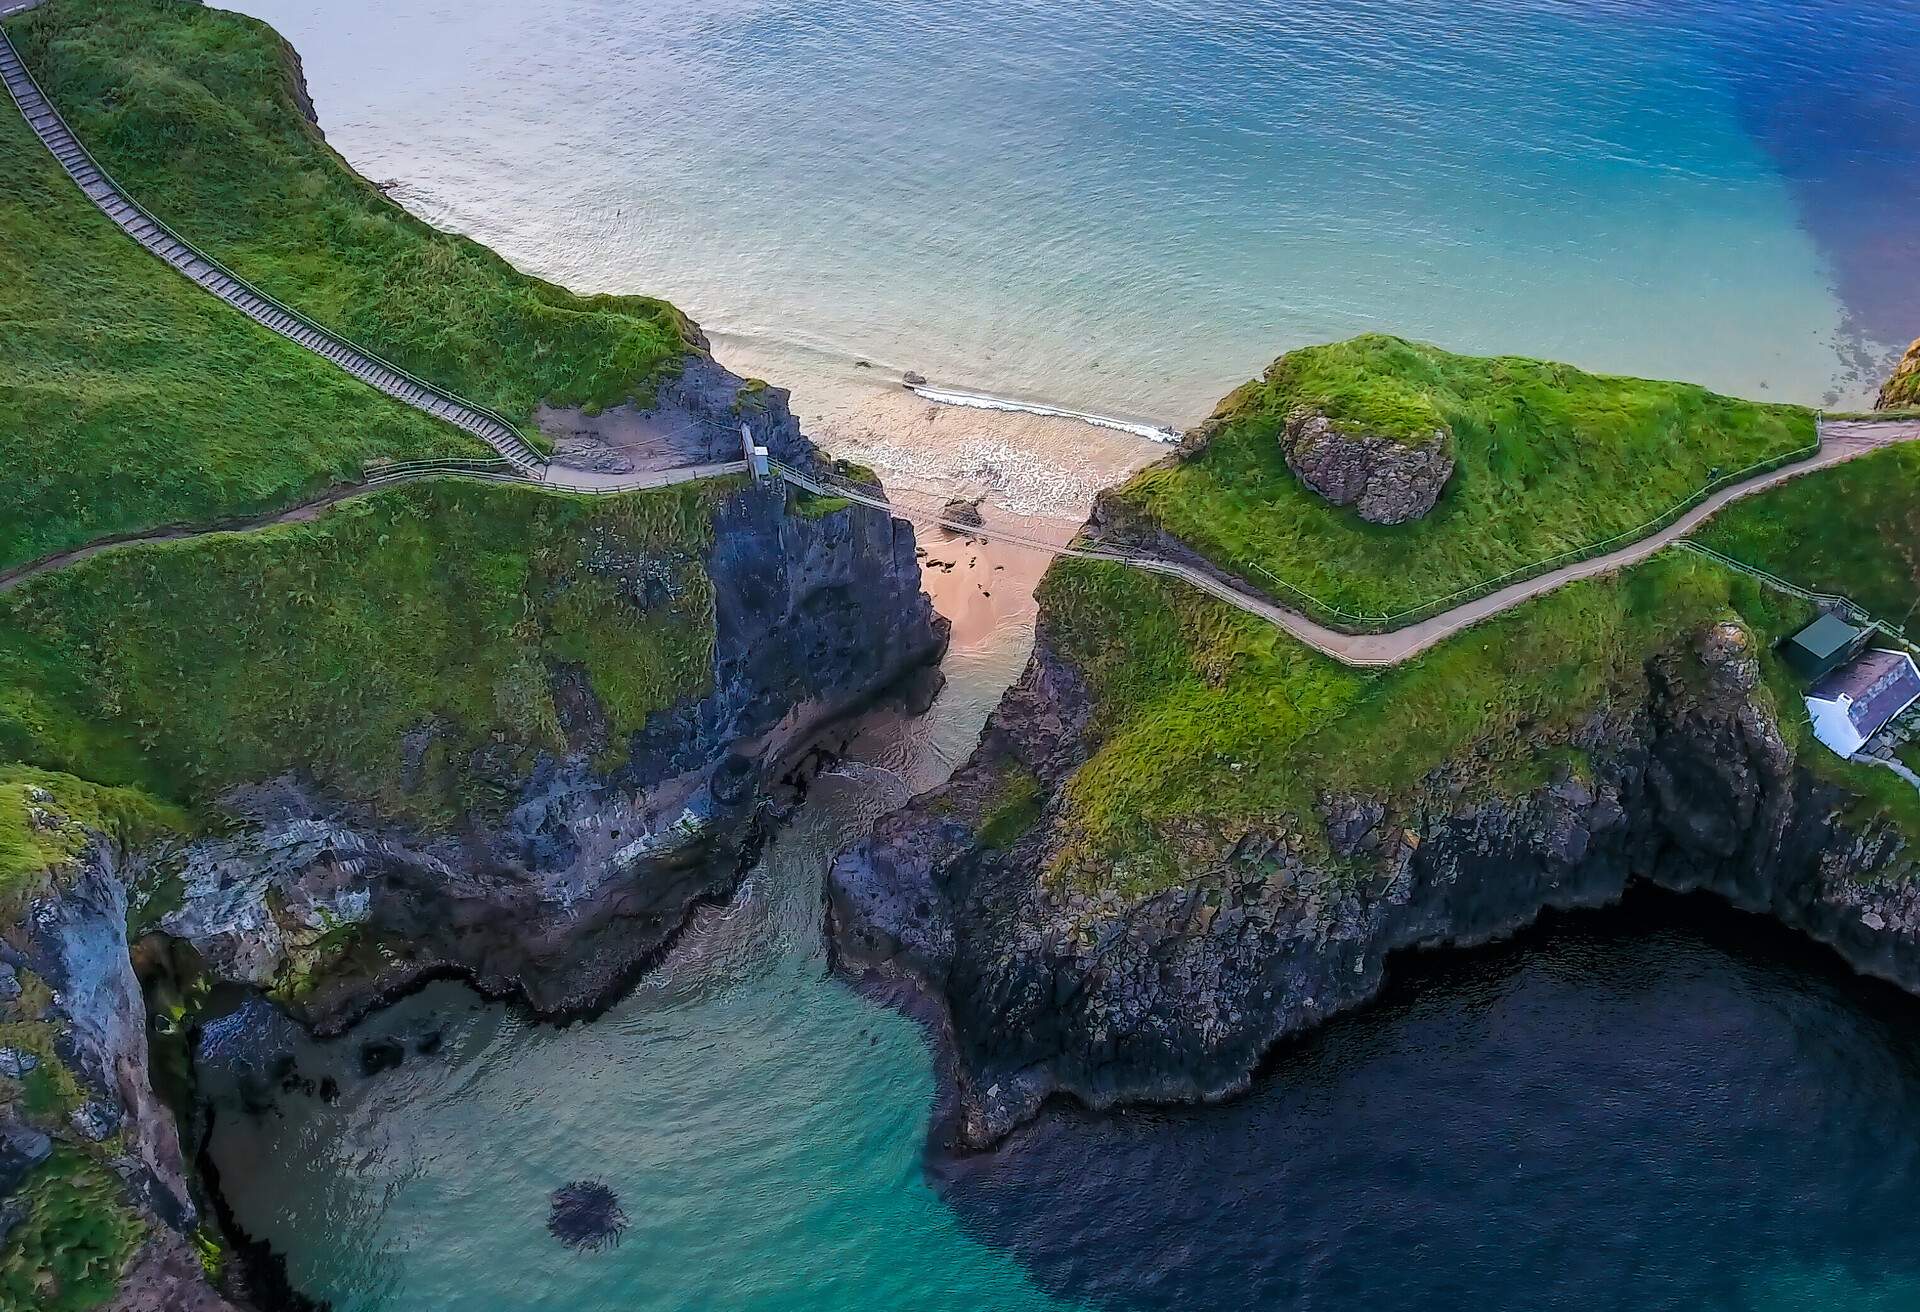 The rope bridge connecting the two cliffs in Northern Ireland it is called the Carrick-a-Rede Rope Bridge taken in an aerial shot